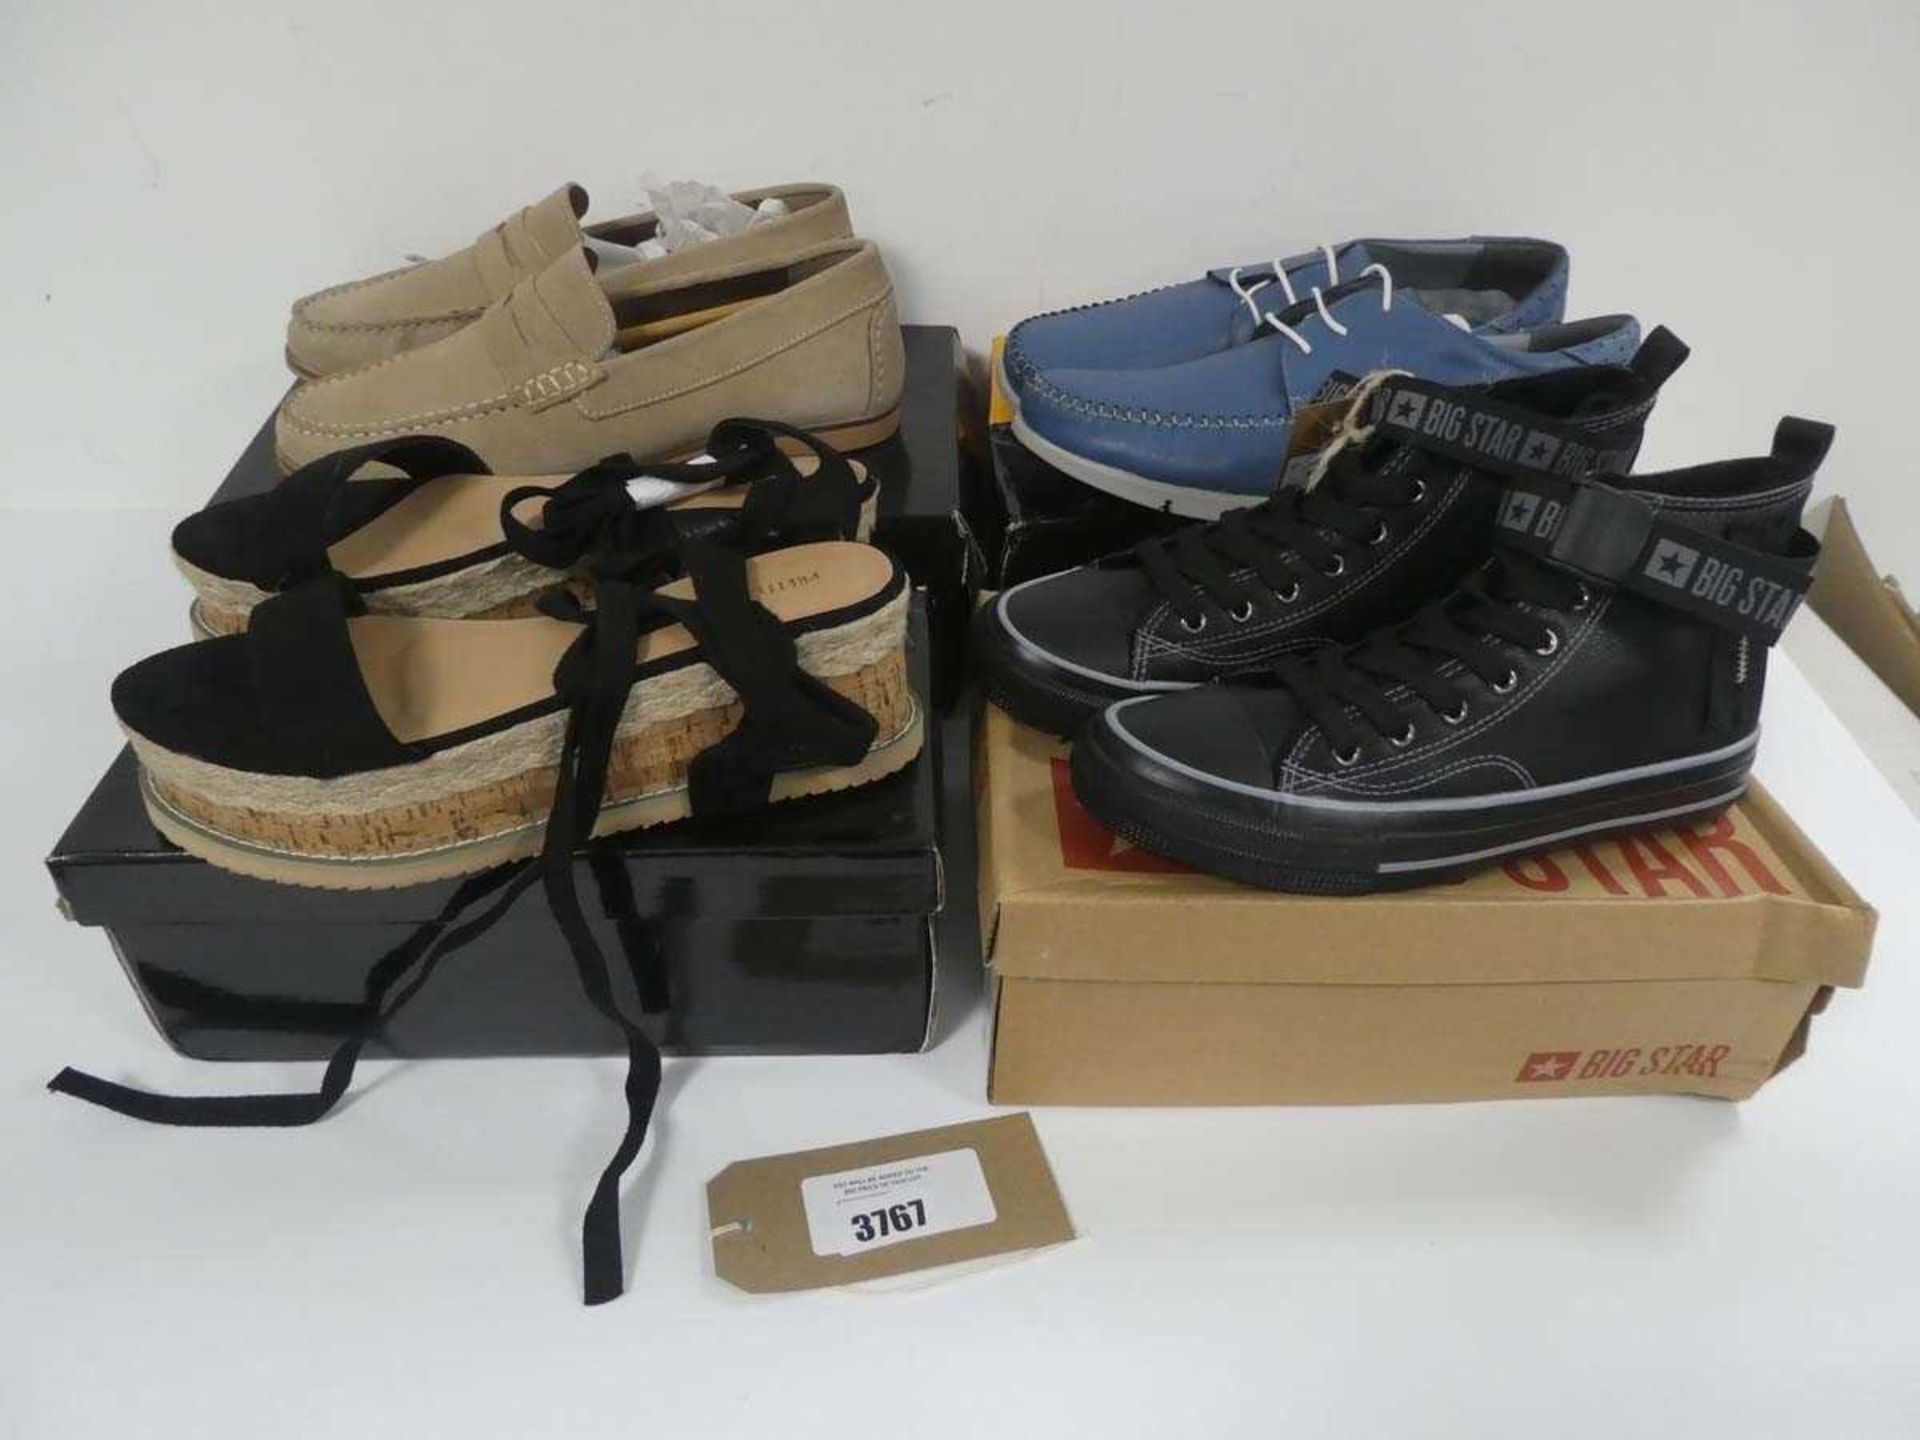 +VAT 4 x Boxed pairs of shoes in various styles to include Big Star, Lusco, Burtons and